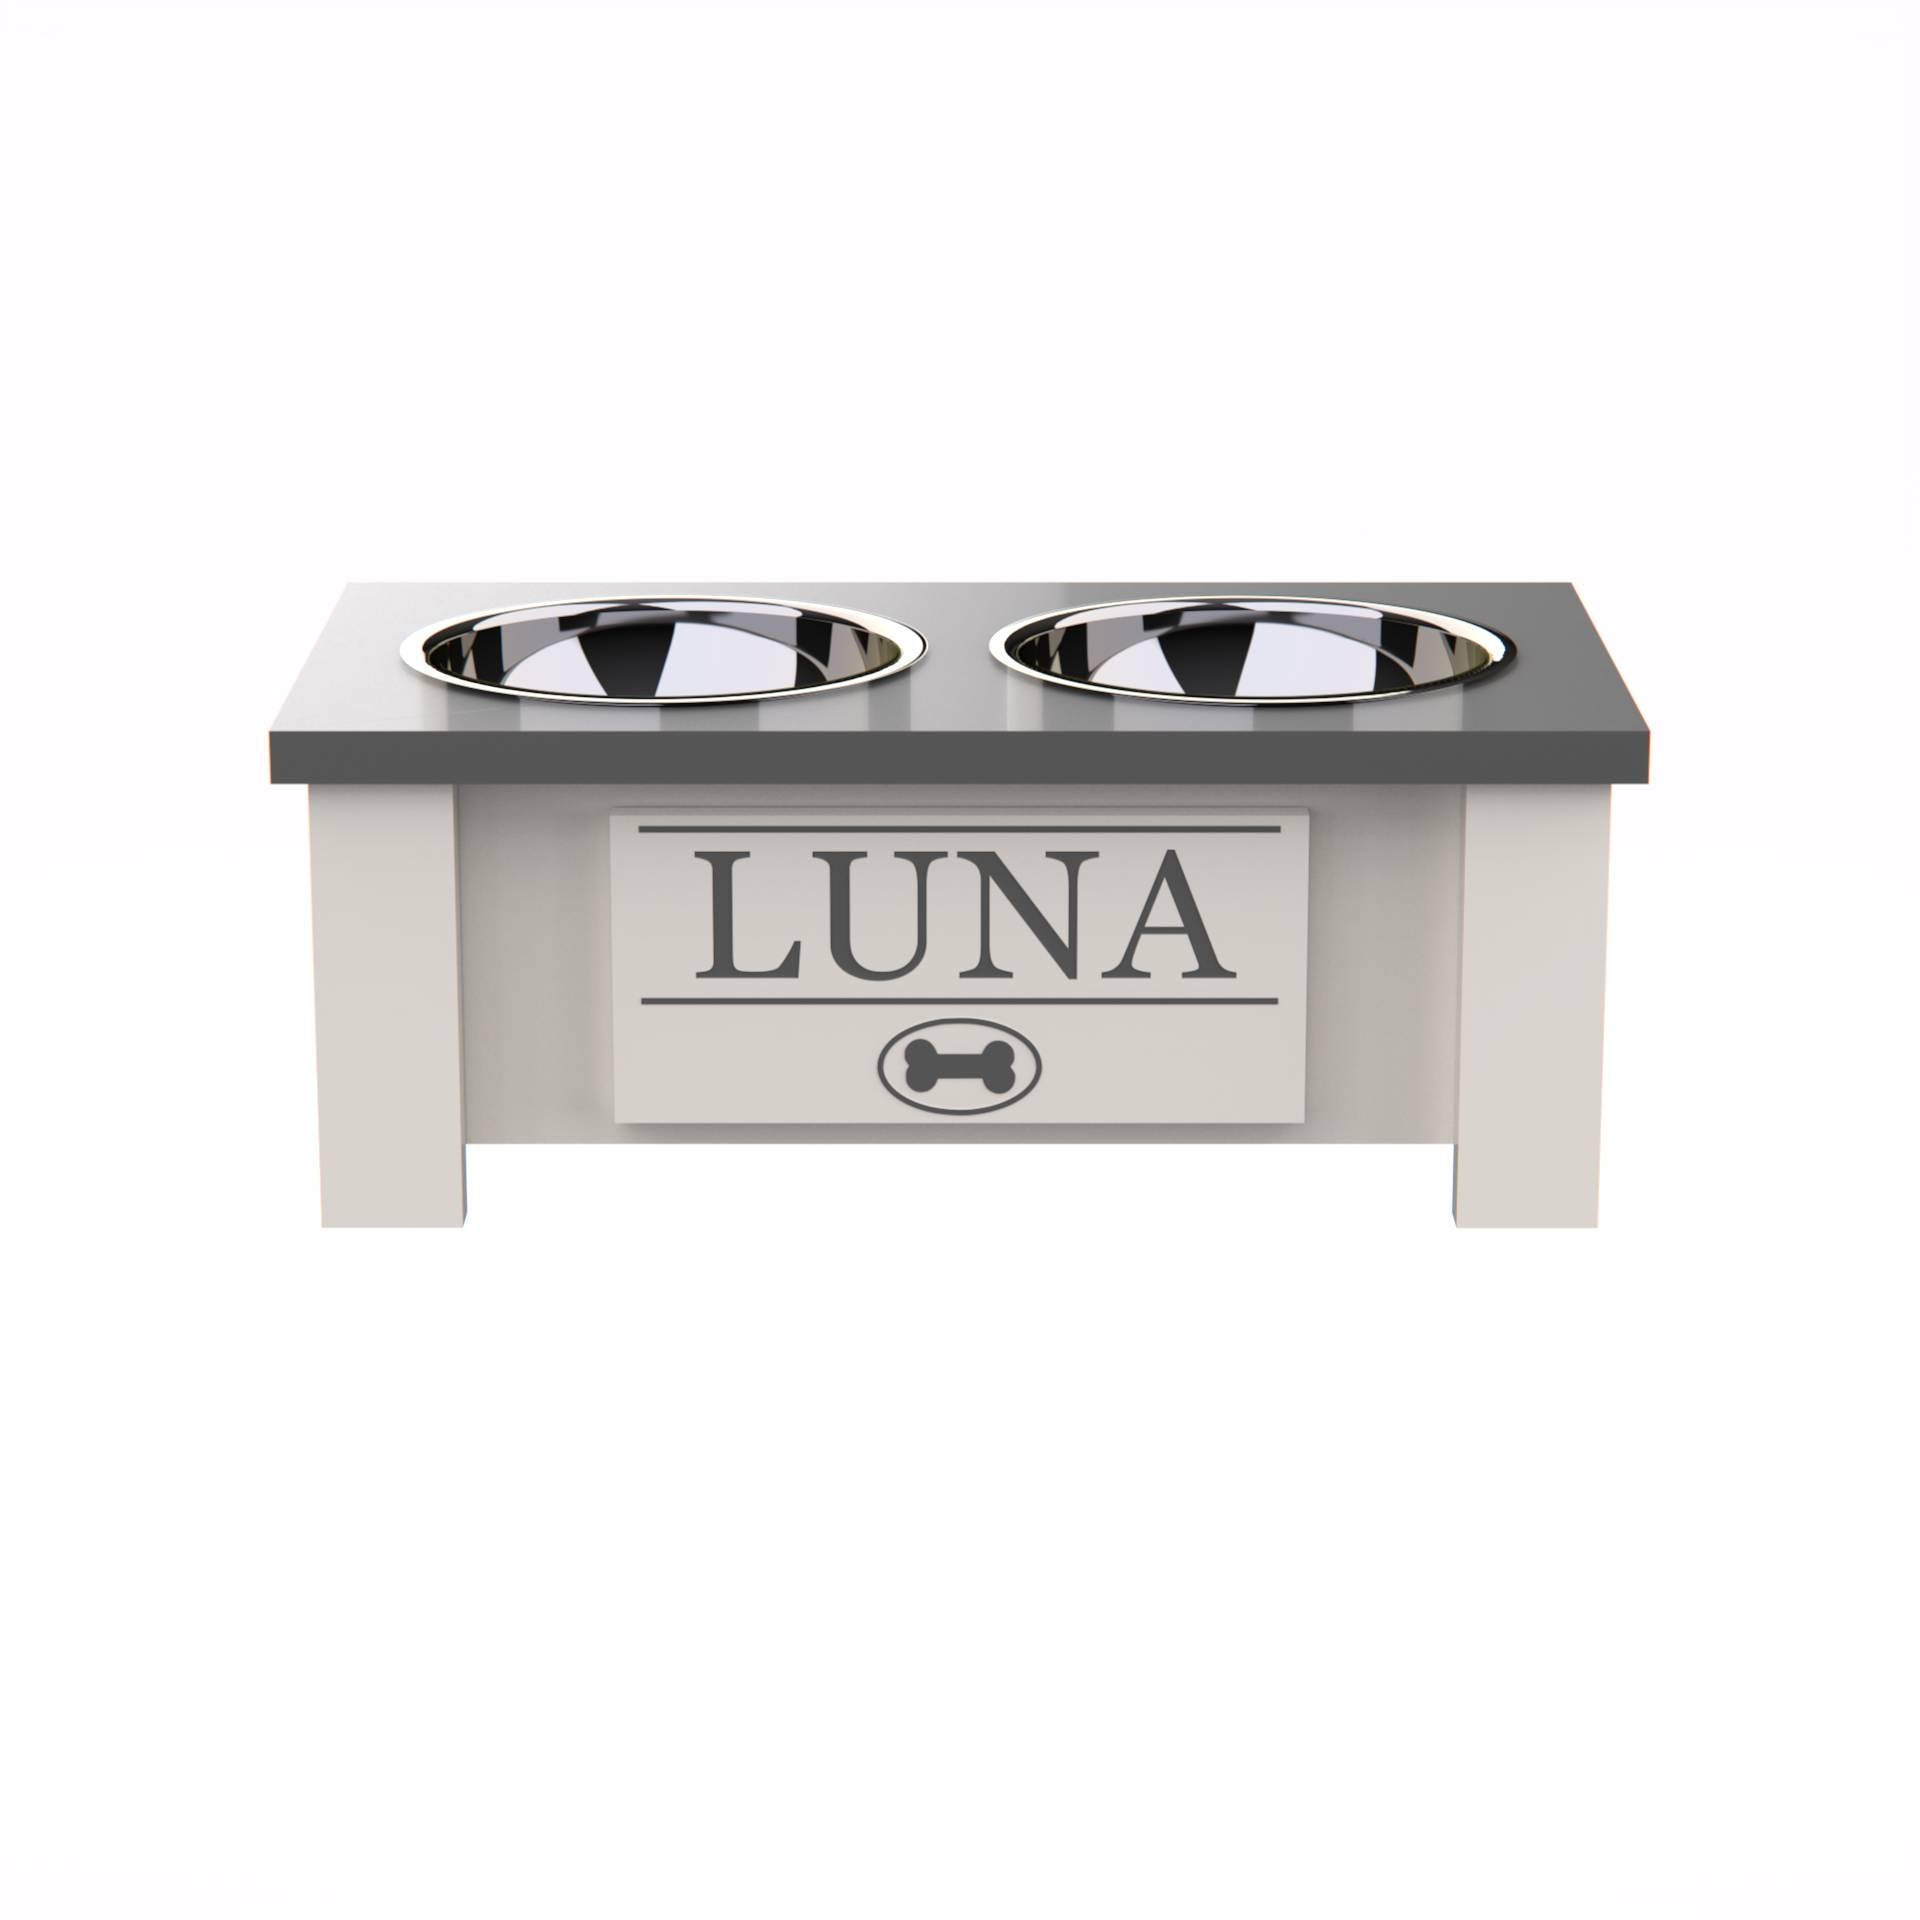 Personalized Elevated Dog Bowl Stand with Internal Storage - Grey